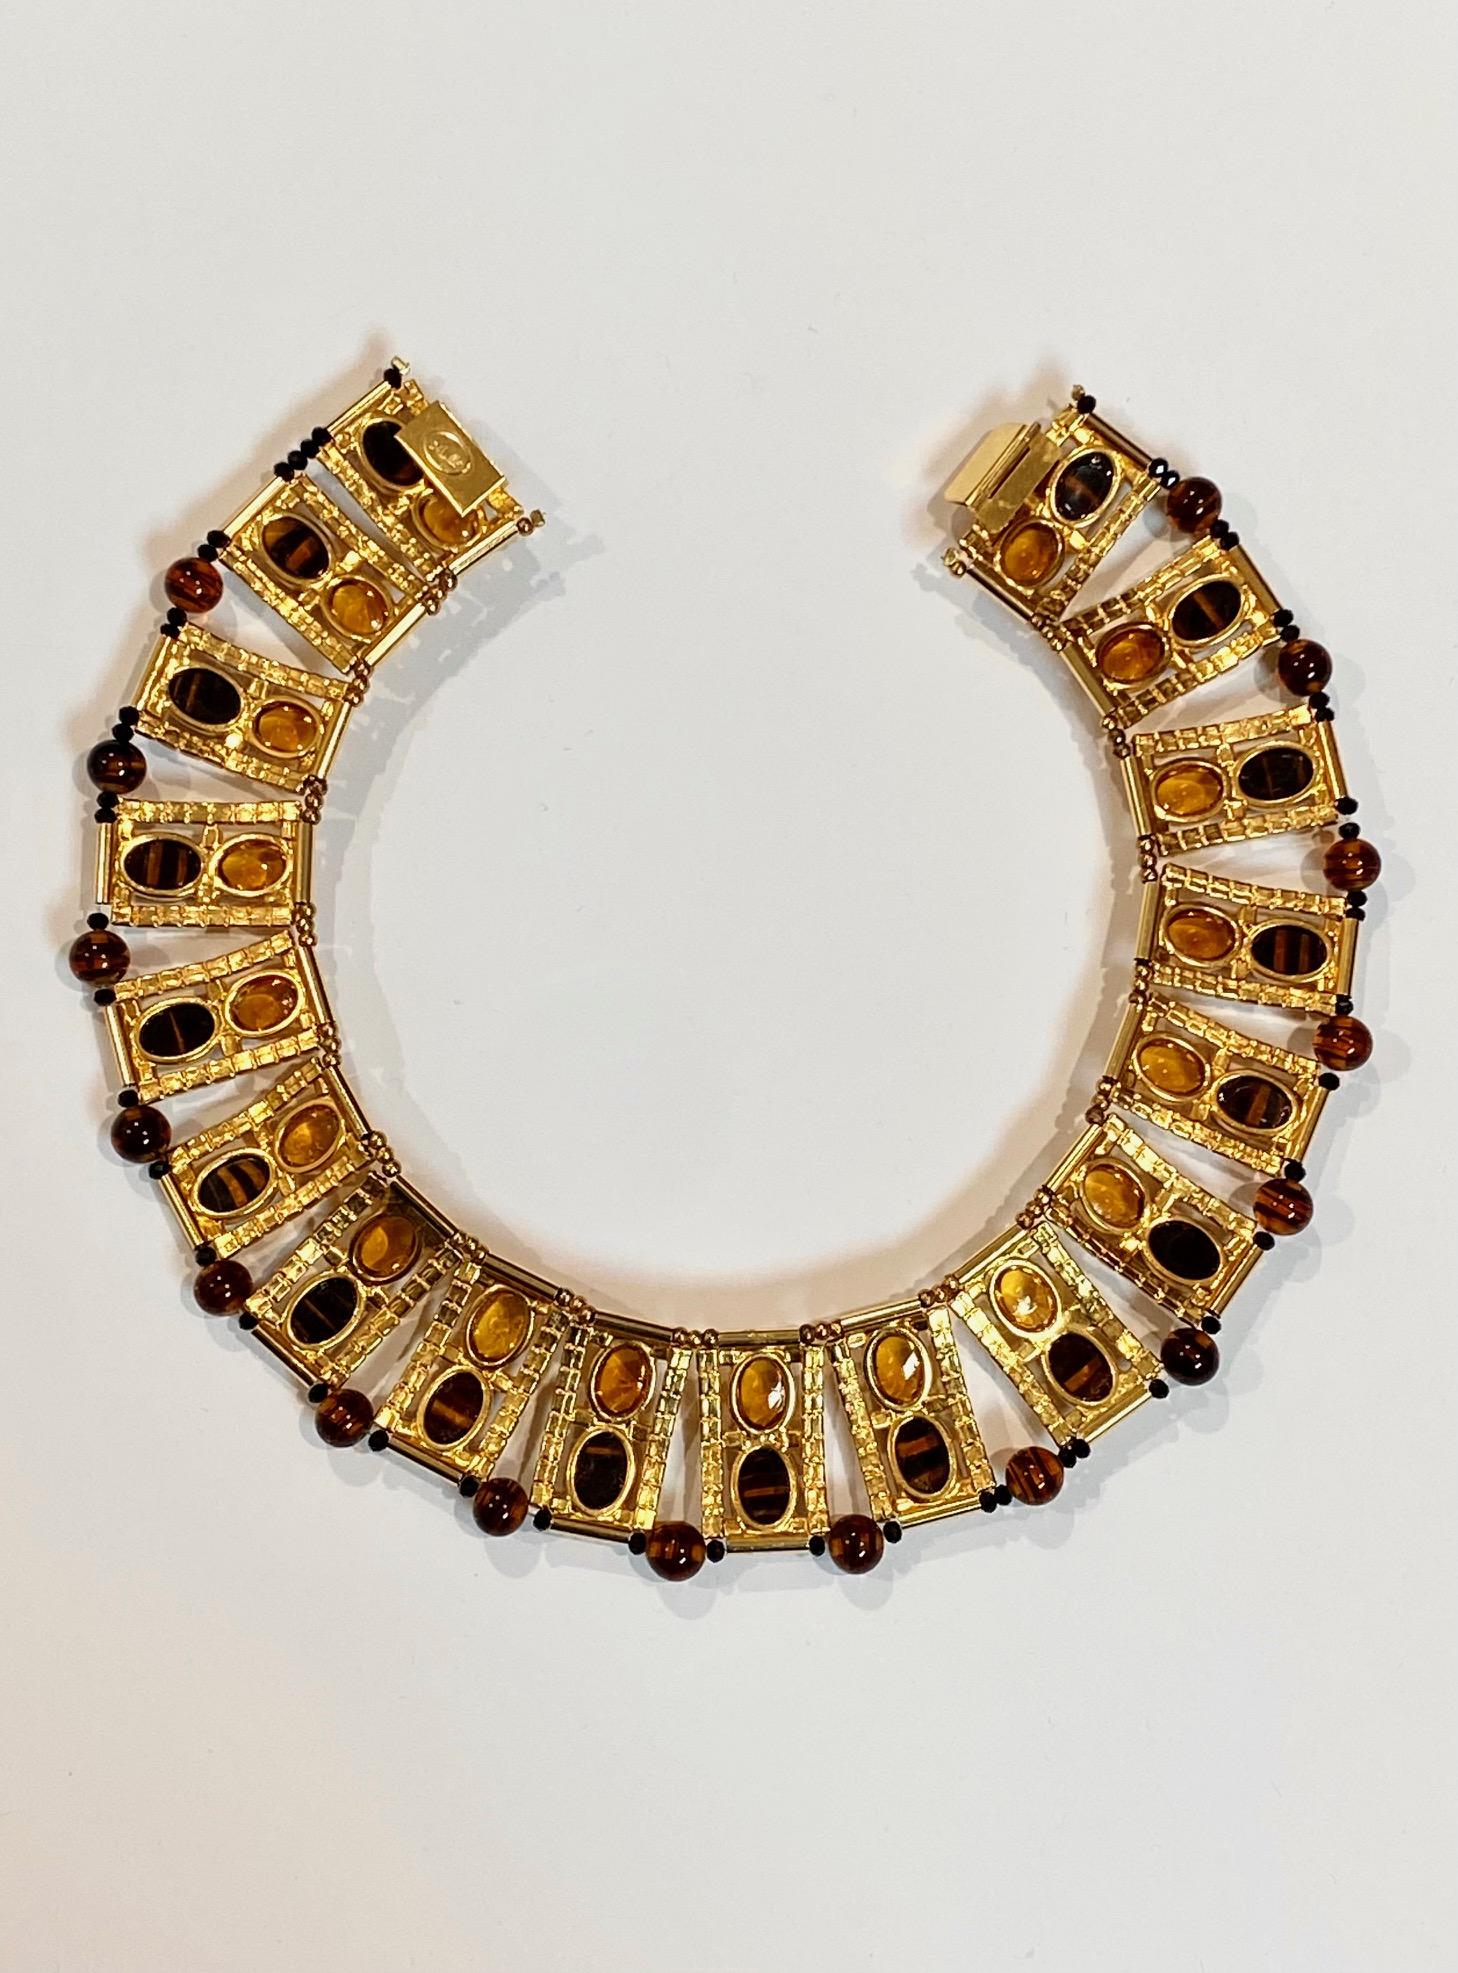 A truly elegant statement necklace, circa 1974, by Avant-garde fashion jewelry designer William DeLillo of NYC. The necklace is in the Egyptian revival style popular in the early 1970s in its wide link collar design. The necklace is comprised of 18